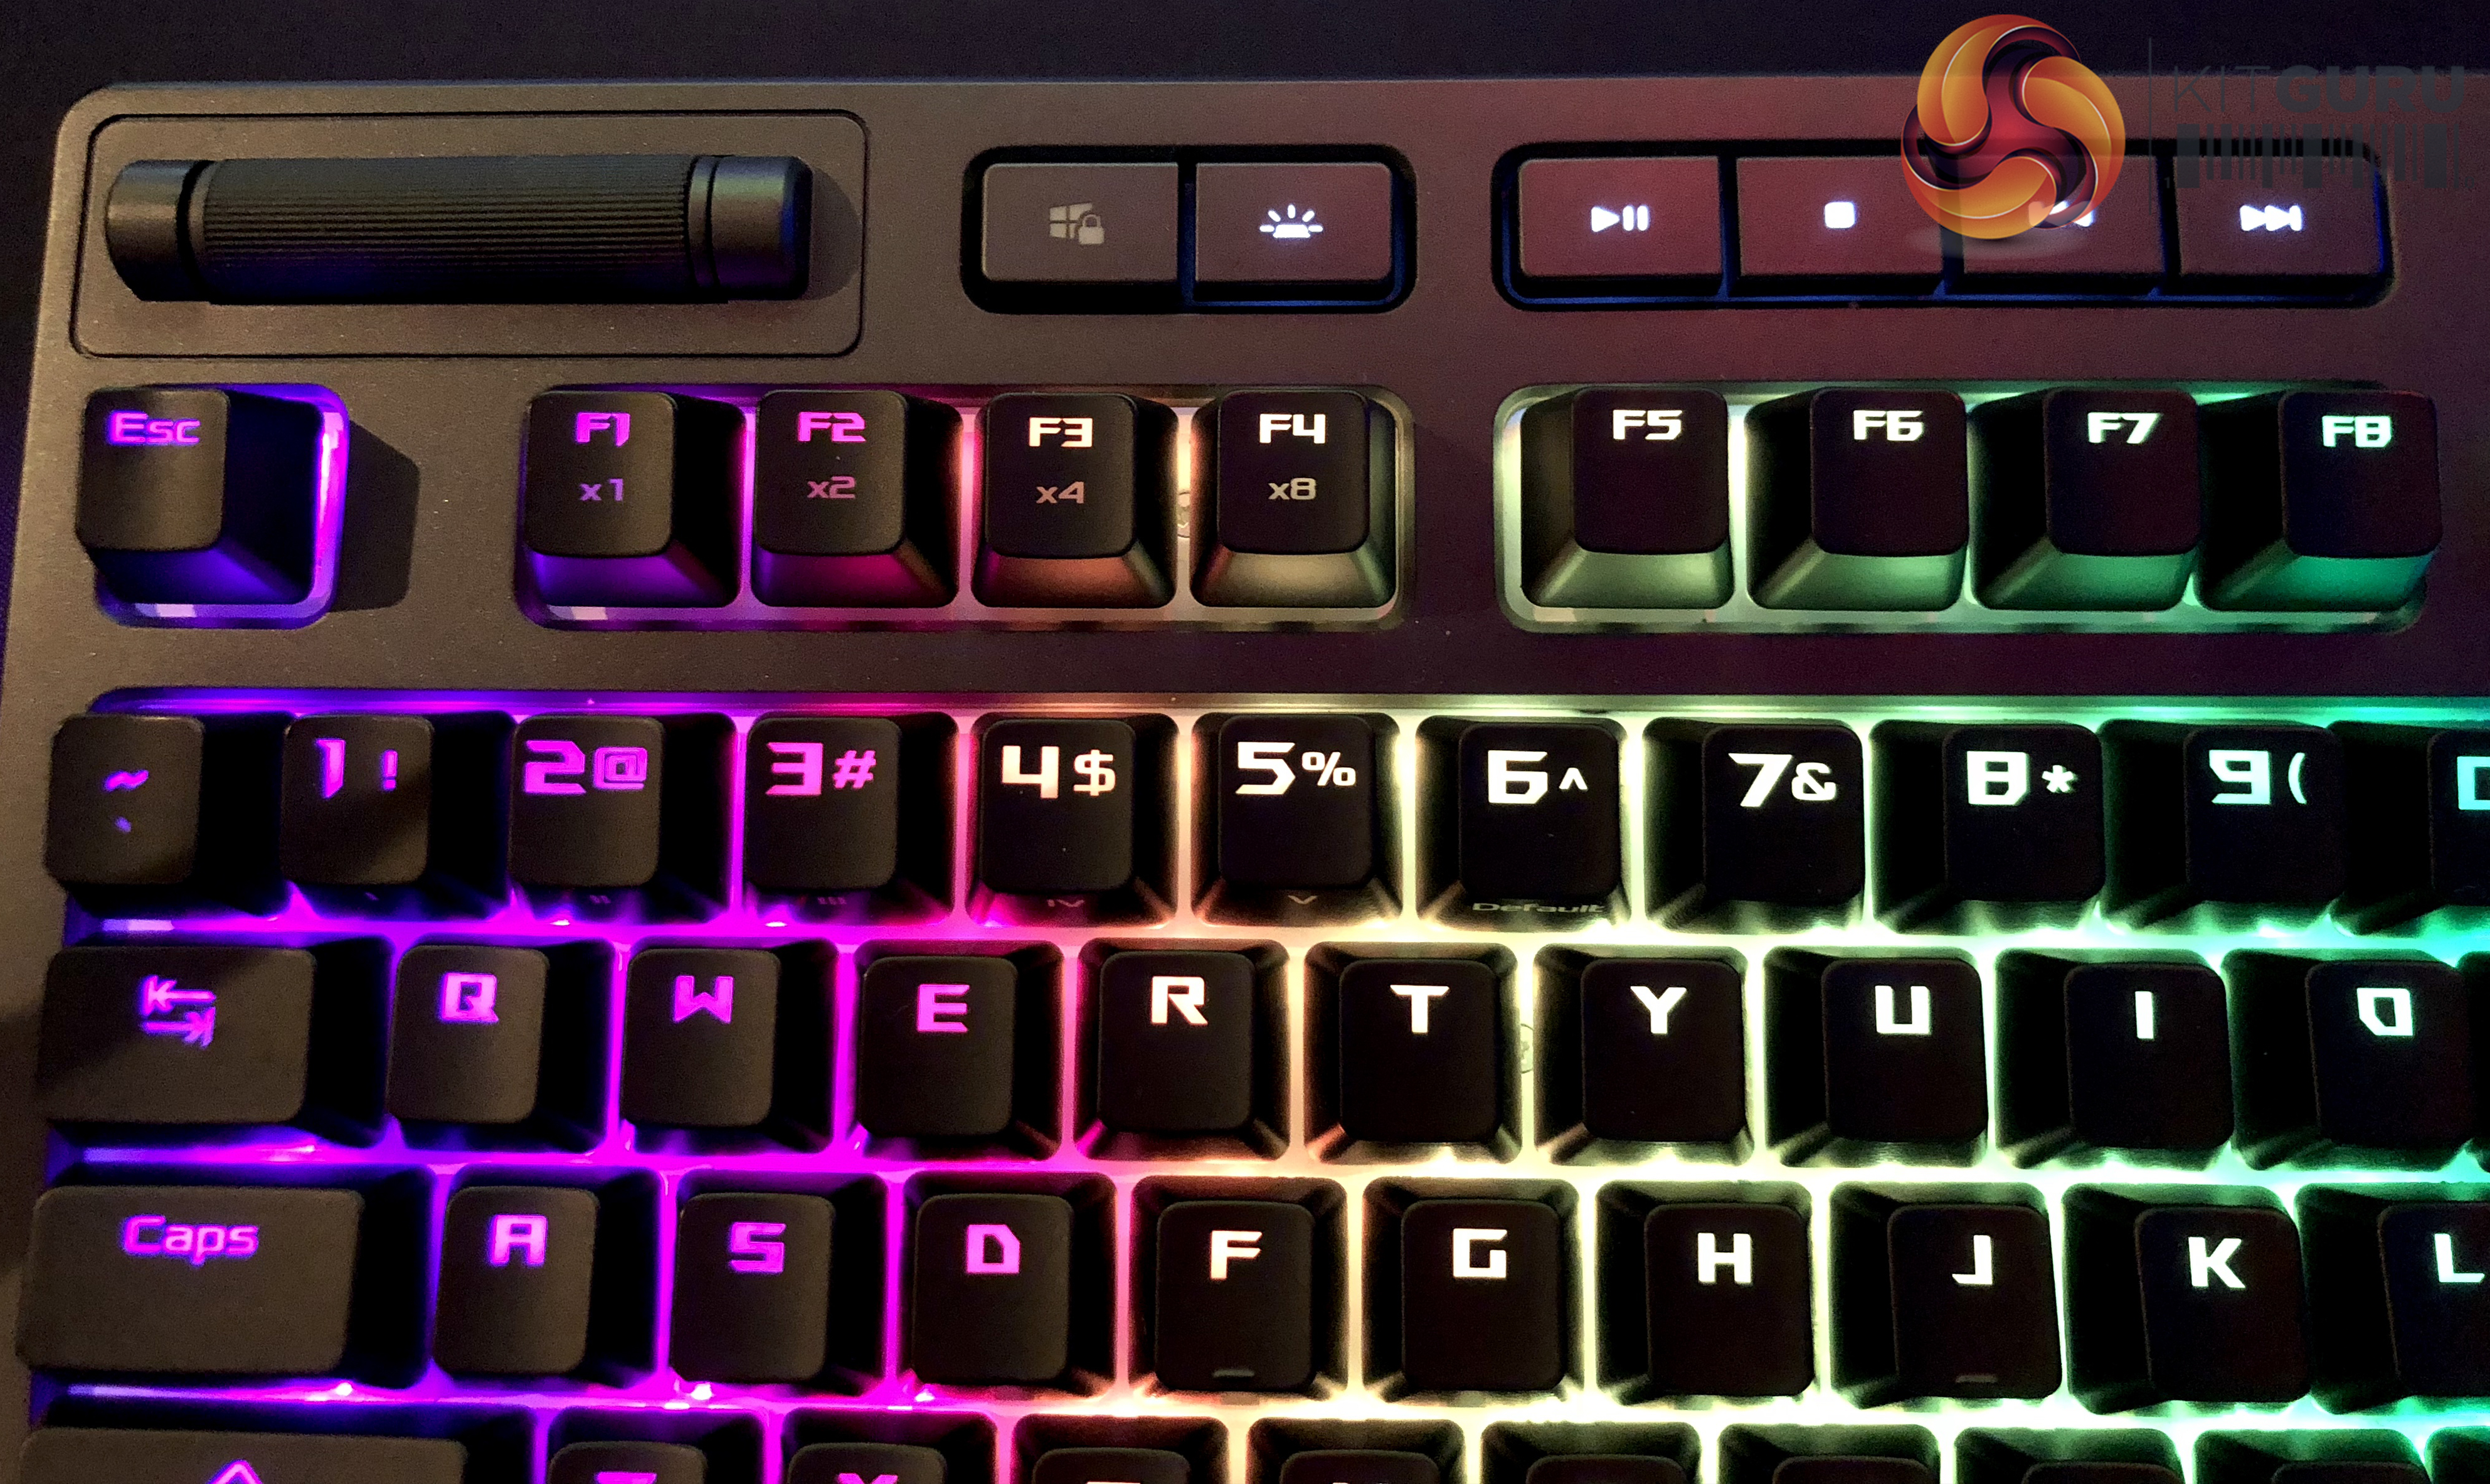 CES: ASUS unveil ROG Strix Flare, a keyboard can light up your team's logo | KitGuru